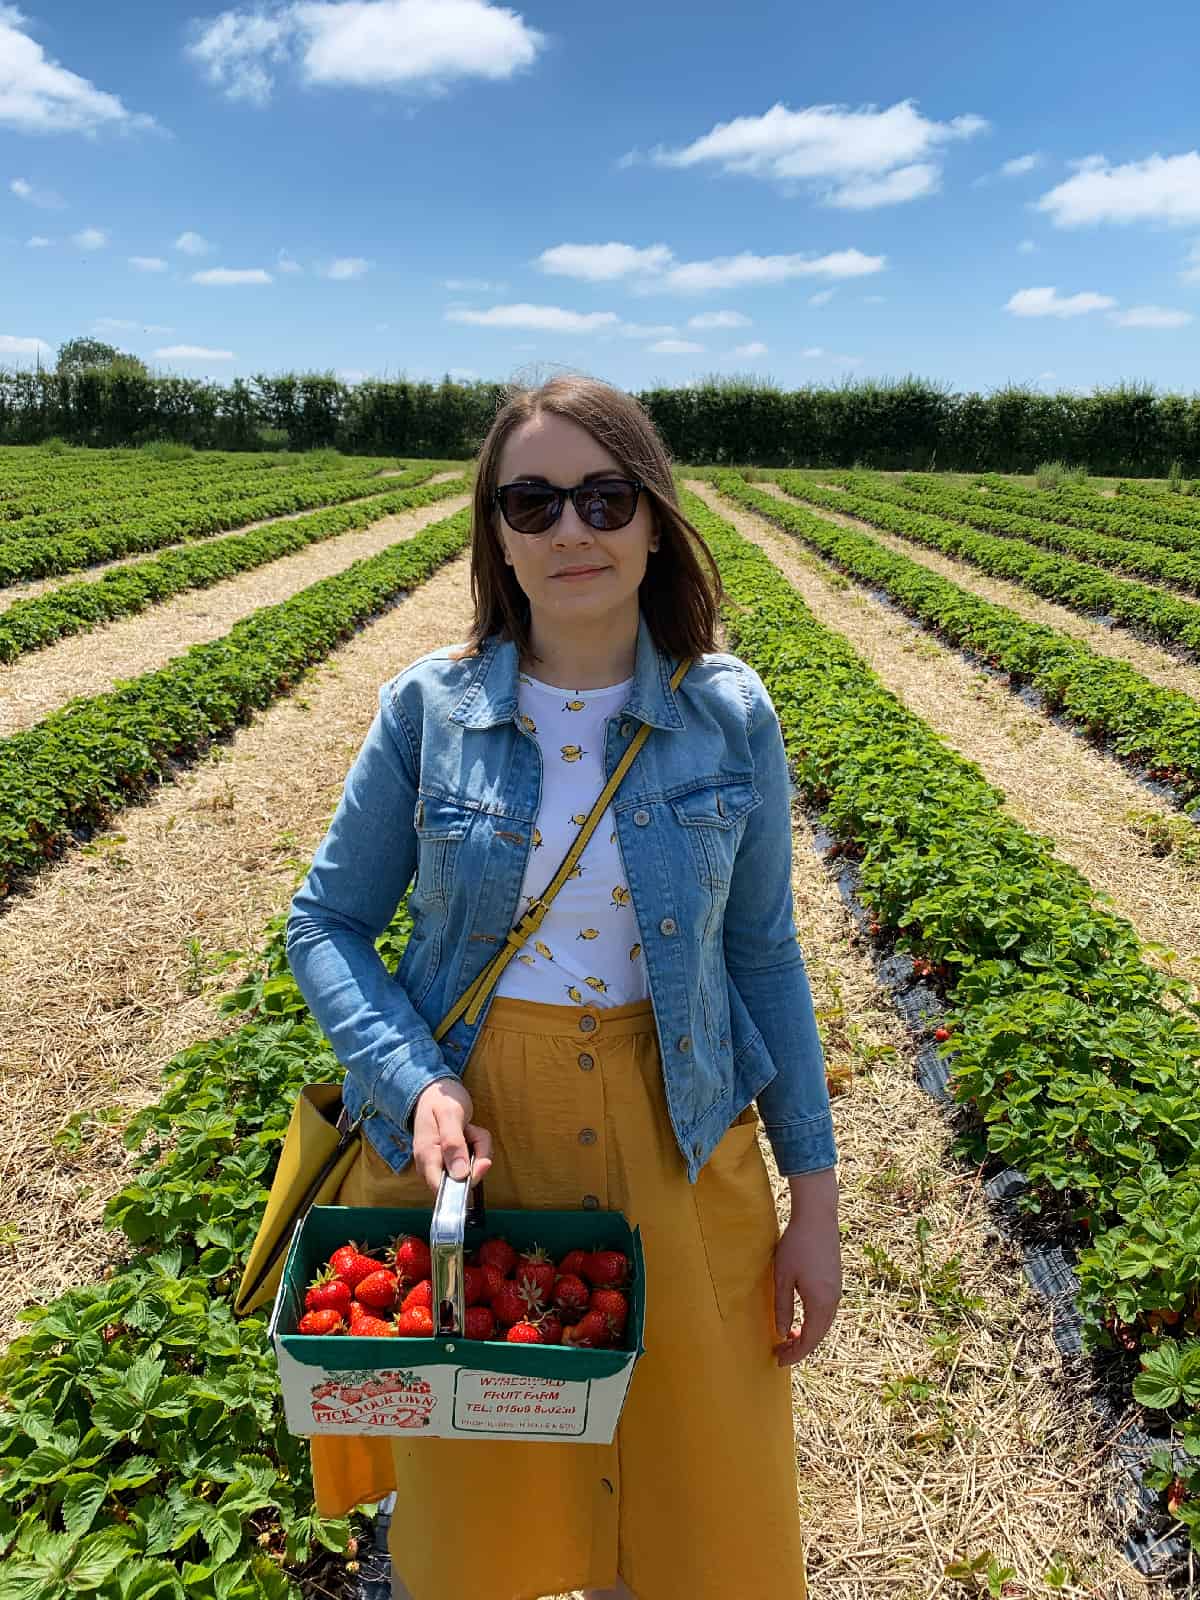 Sasha standing in a field with rows of strawberries holding a basket with strawberries.